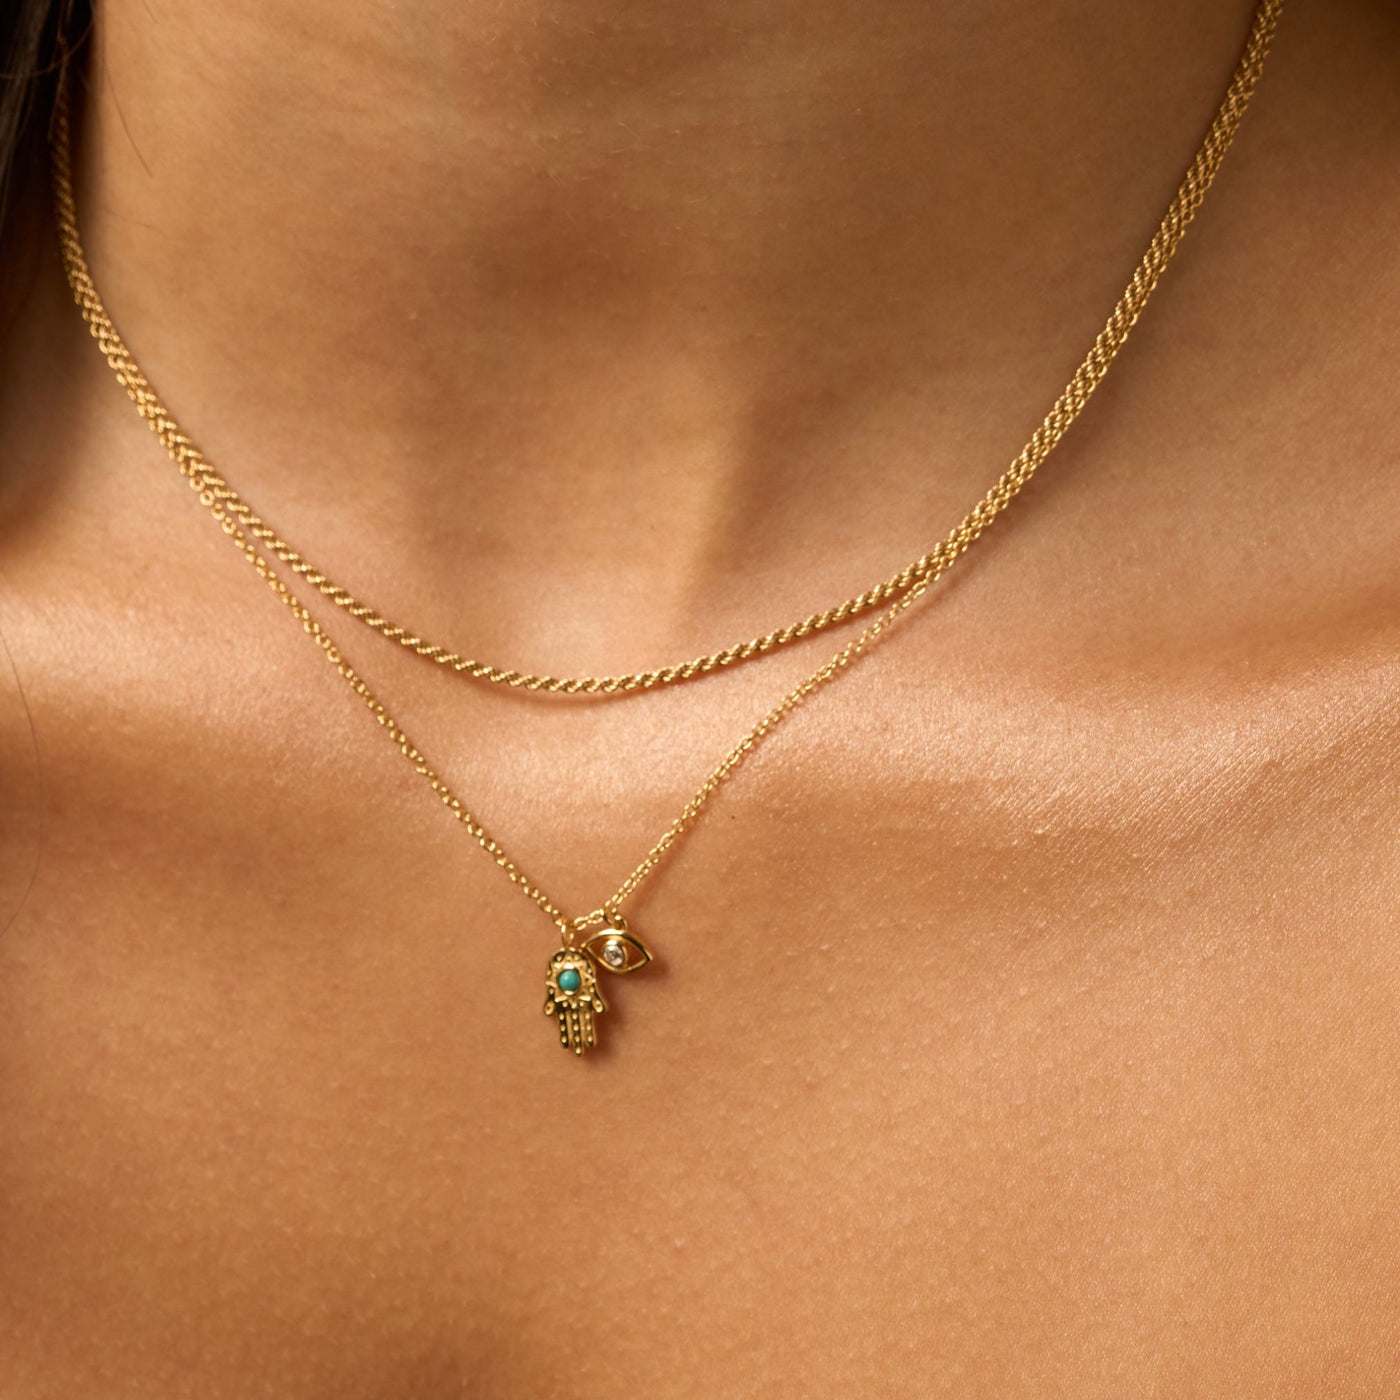 Delicate Rope Chain Necklace